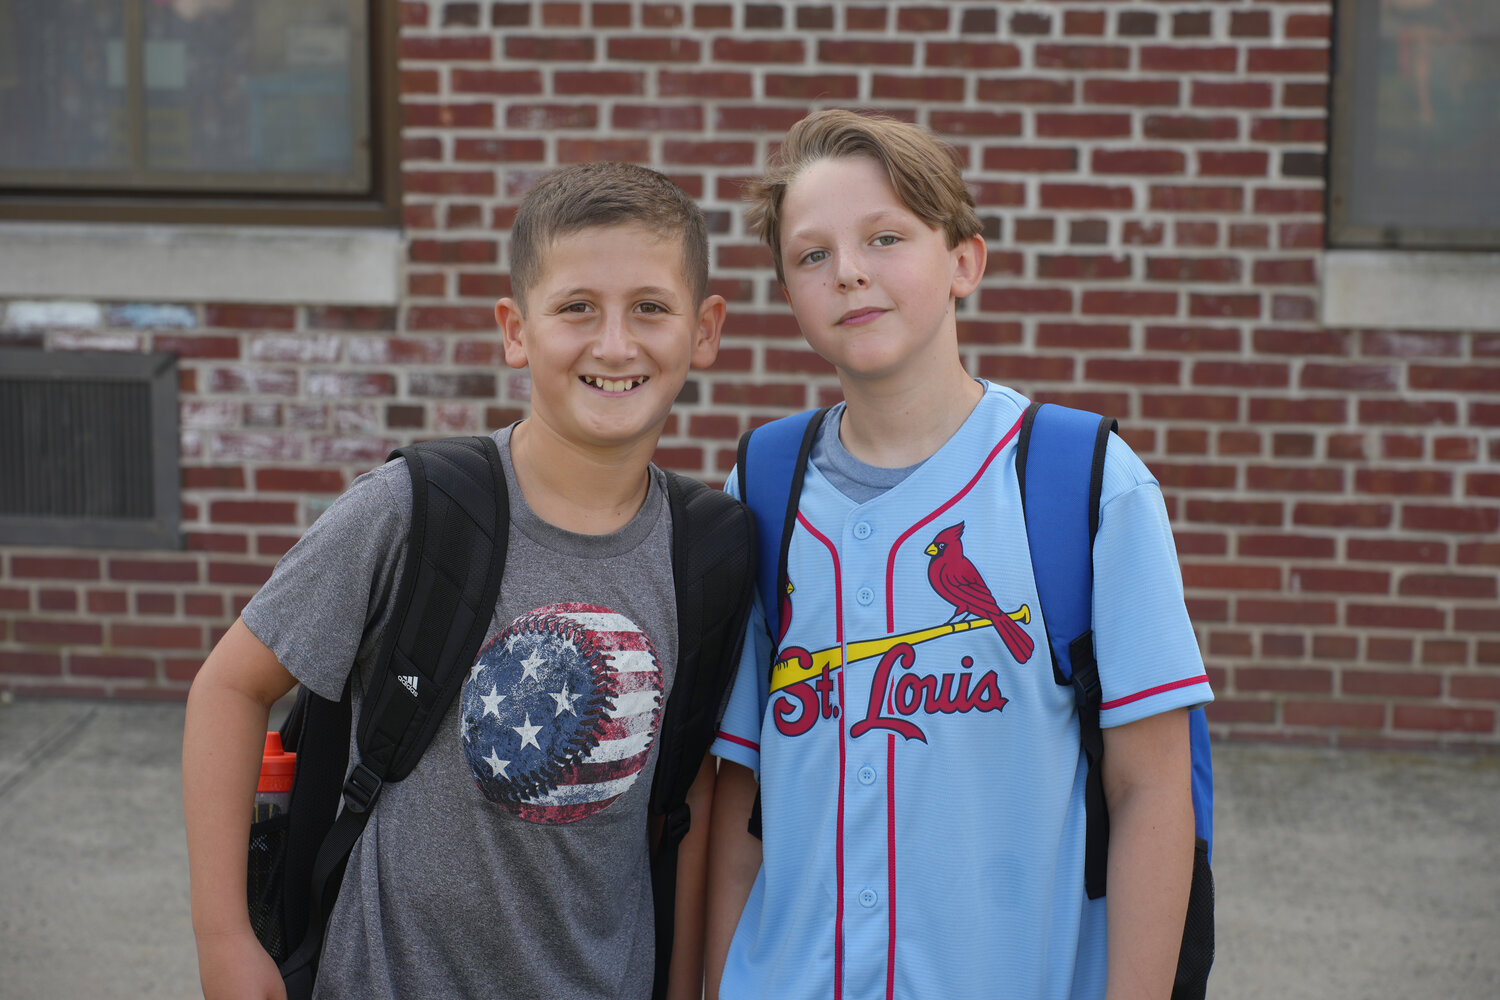 Ethan Horowitz and Nick Rossner get ready for the start of 5th grade at Covert Elementary School.